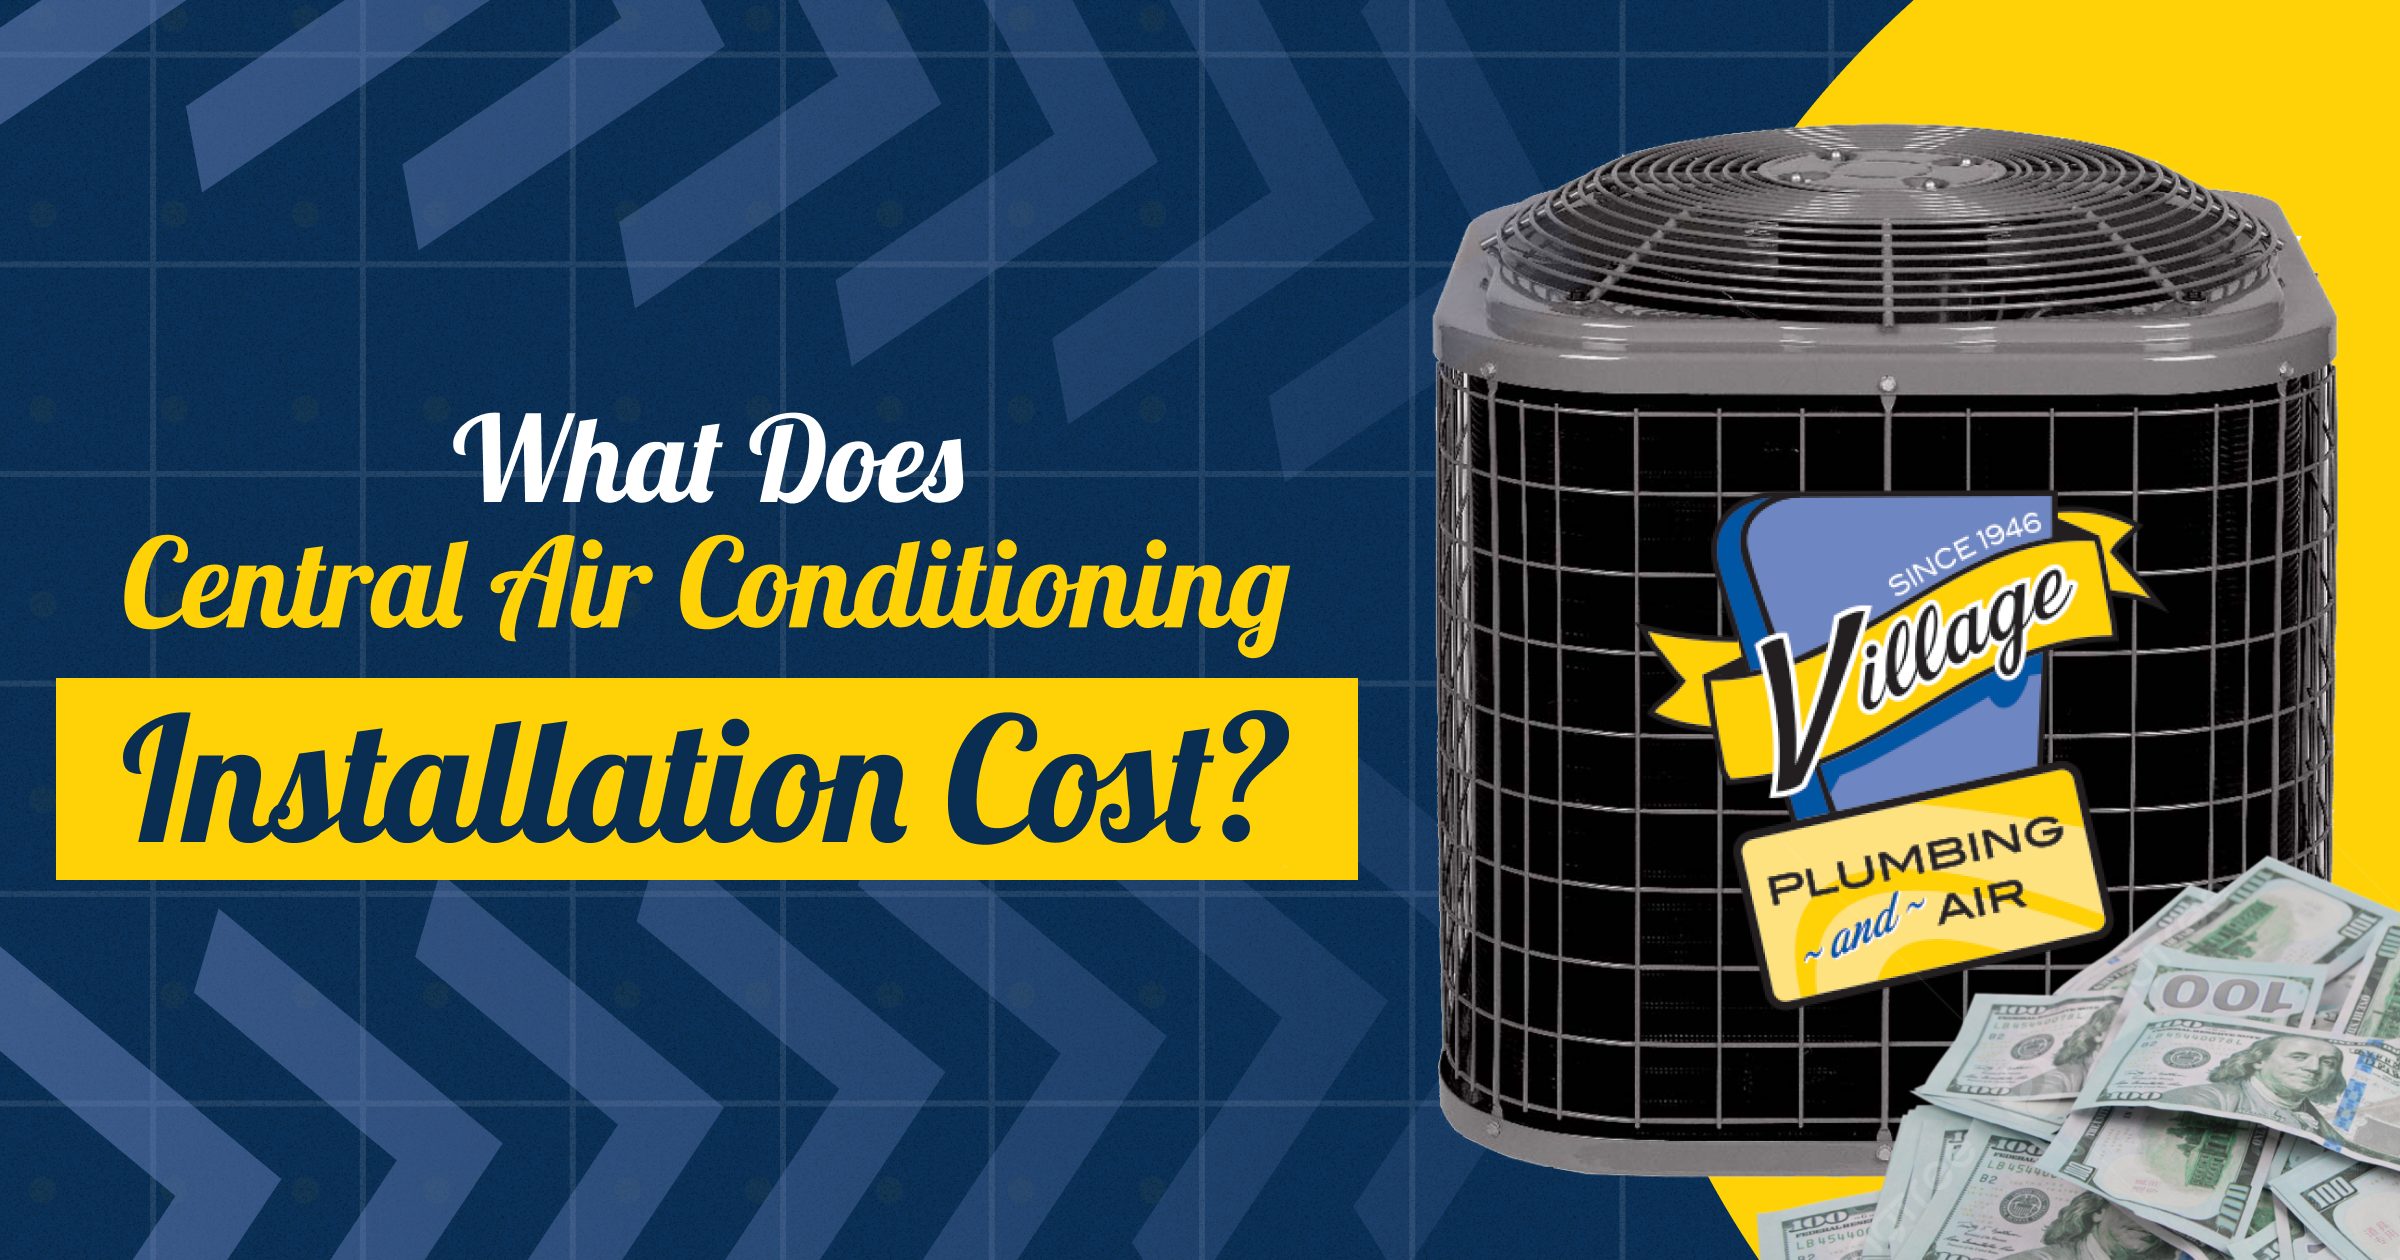 What does central air conditioning cost?